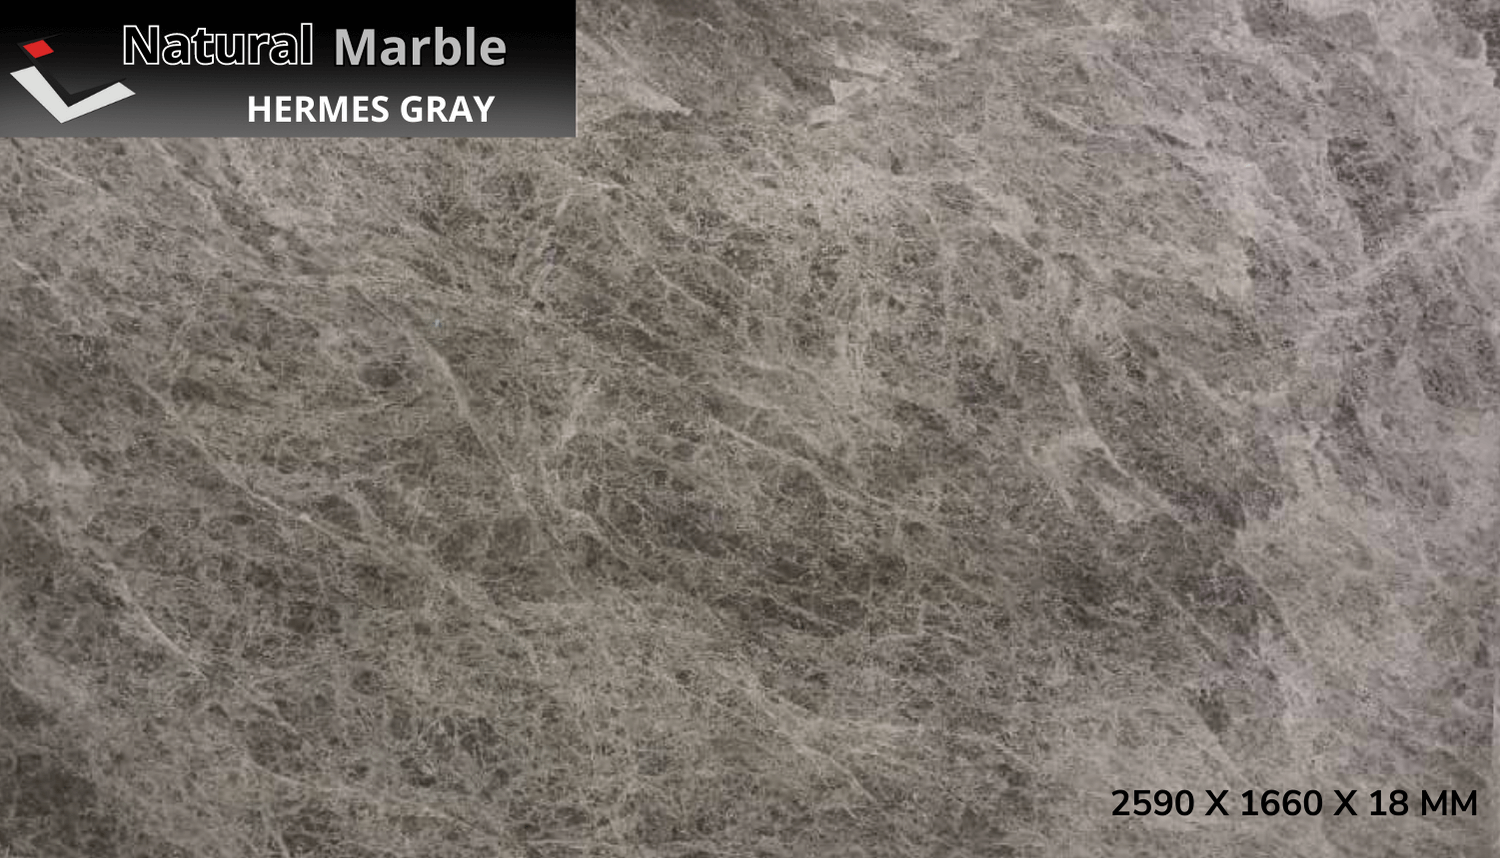 Natural Marble Stone - Hermes Gray